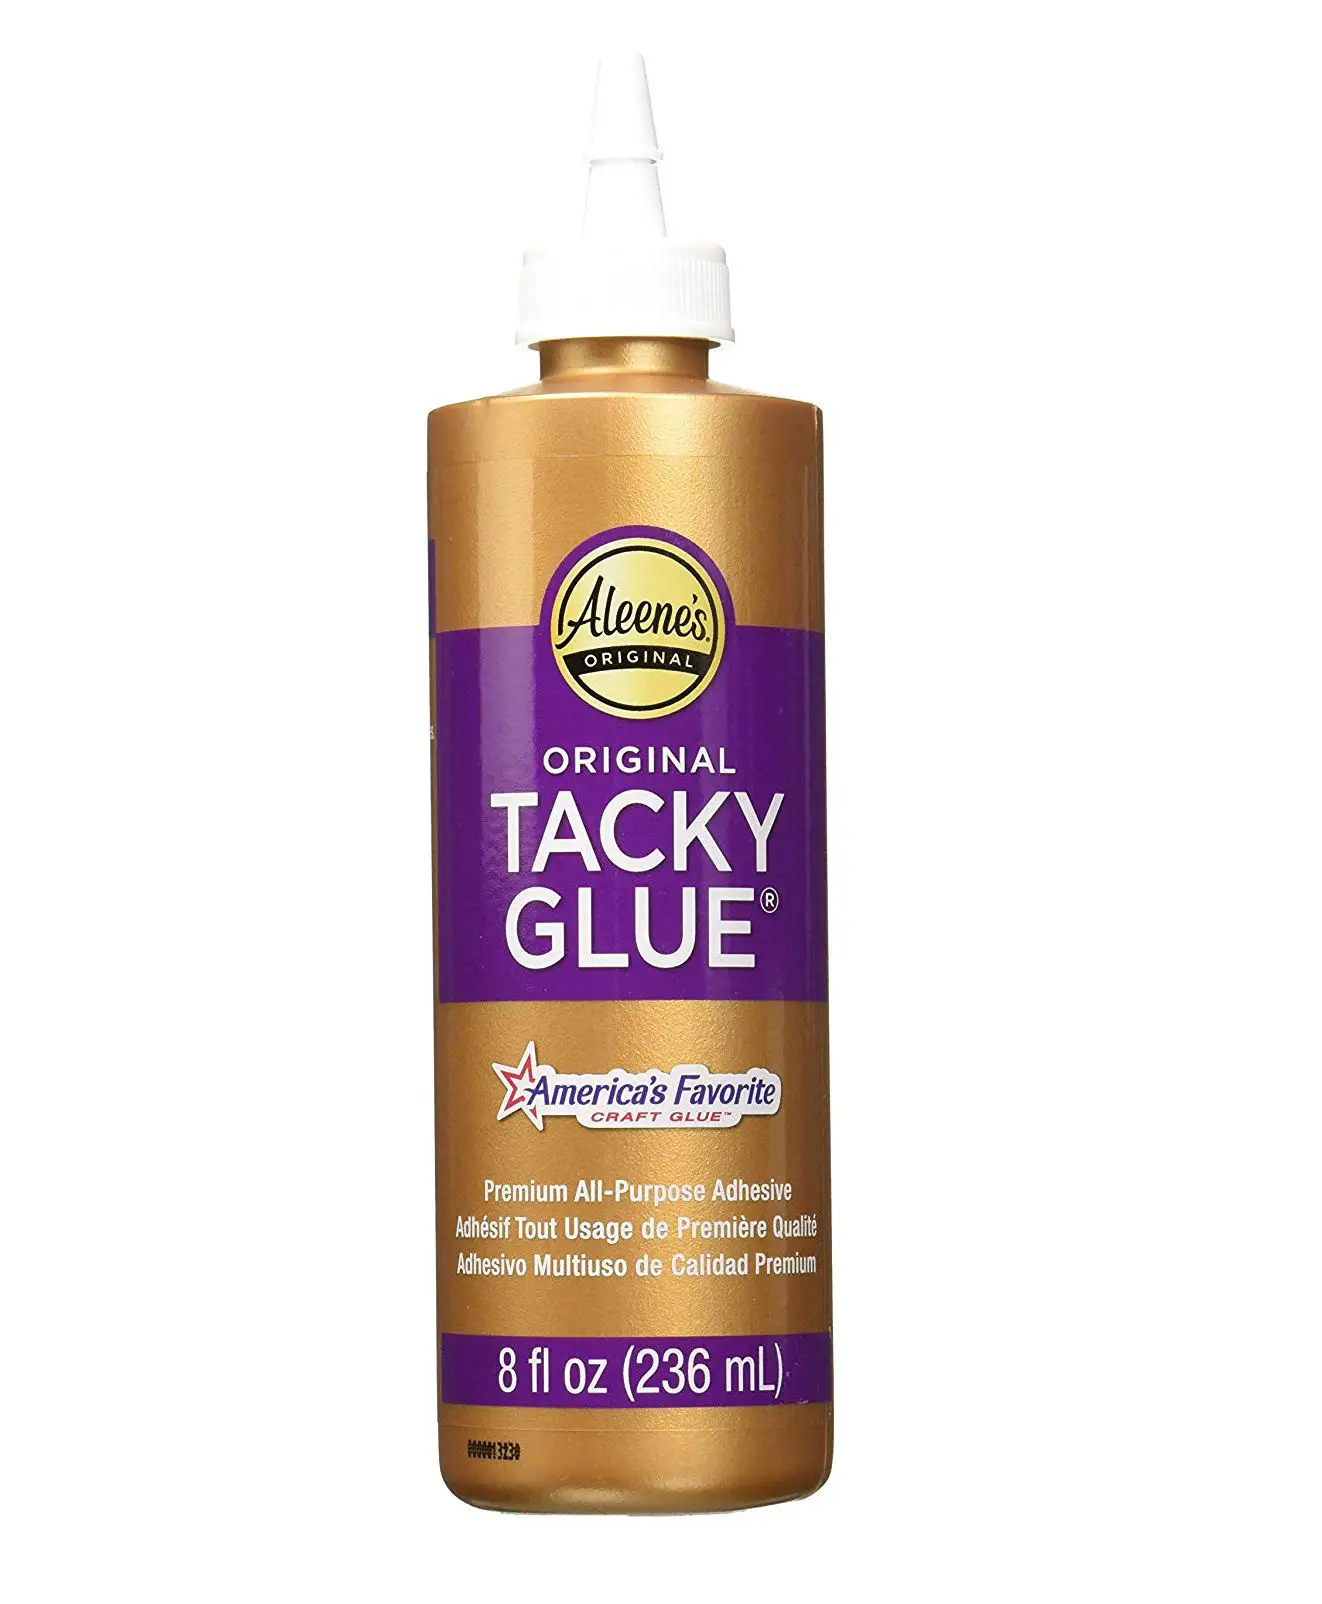 What Is The Best Glue For Crafting